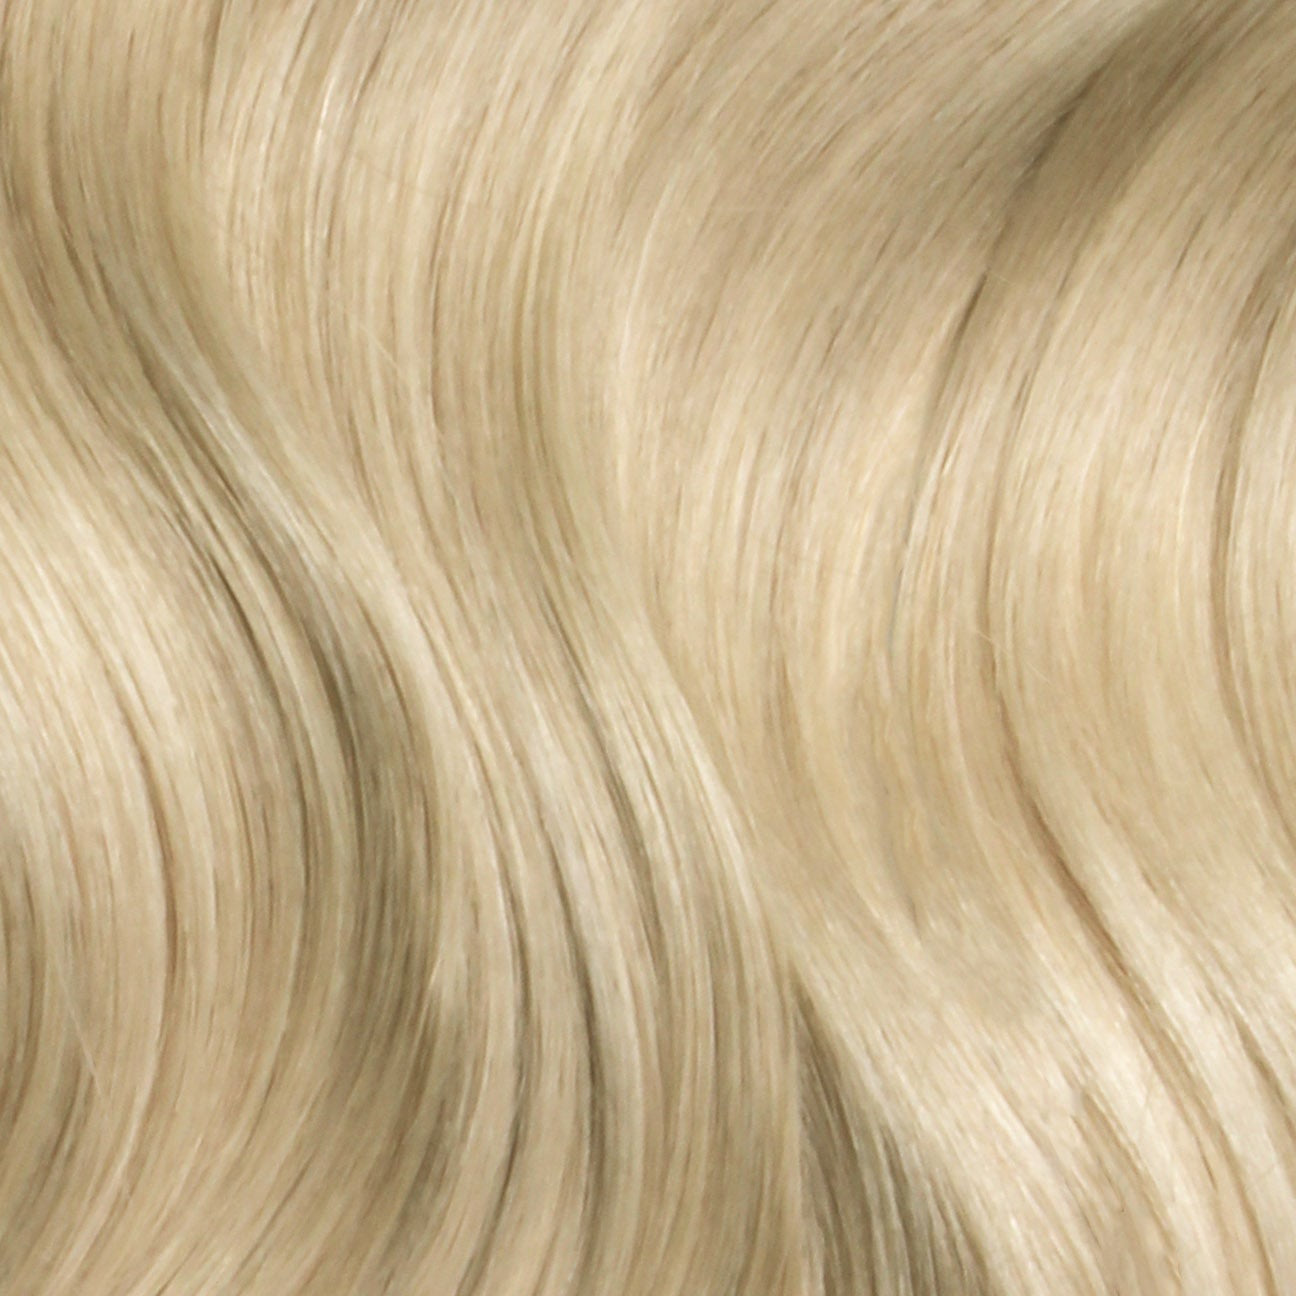 Nano Bonds 18 Inches - SWAY Hair Extensions Hollywood-Ash-Blonde-18A-613A Ultra-fine, invisible bonds for a flawless, natural look. 100% Remy Human hair, lightweight and versatile. Reusable and perfect for individual or salon use.